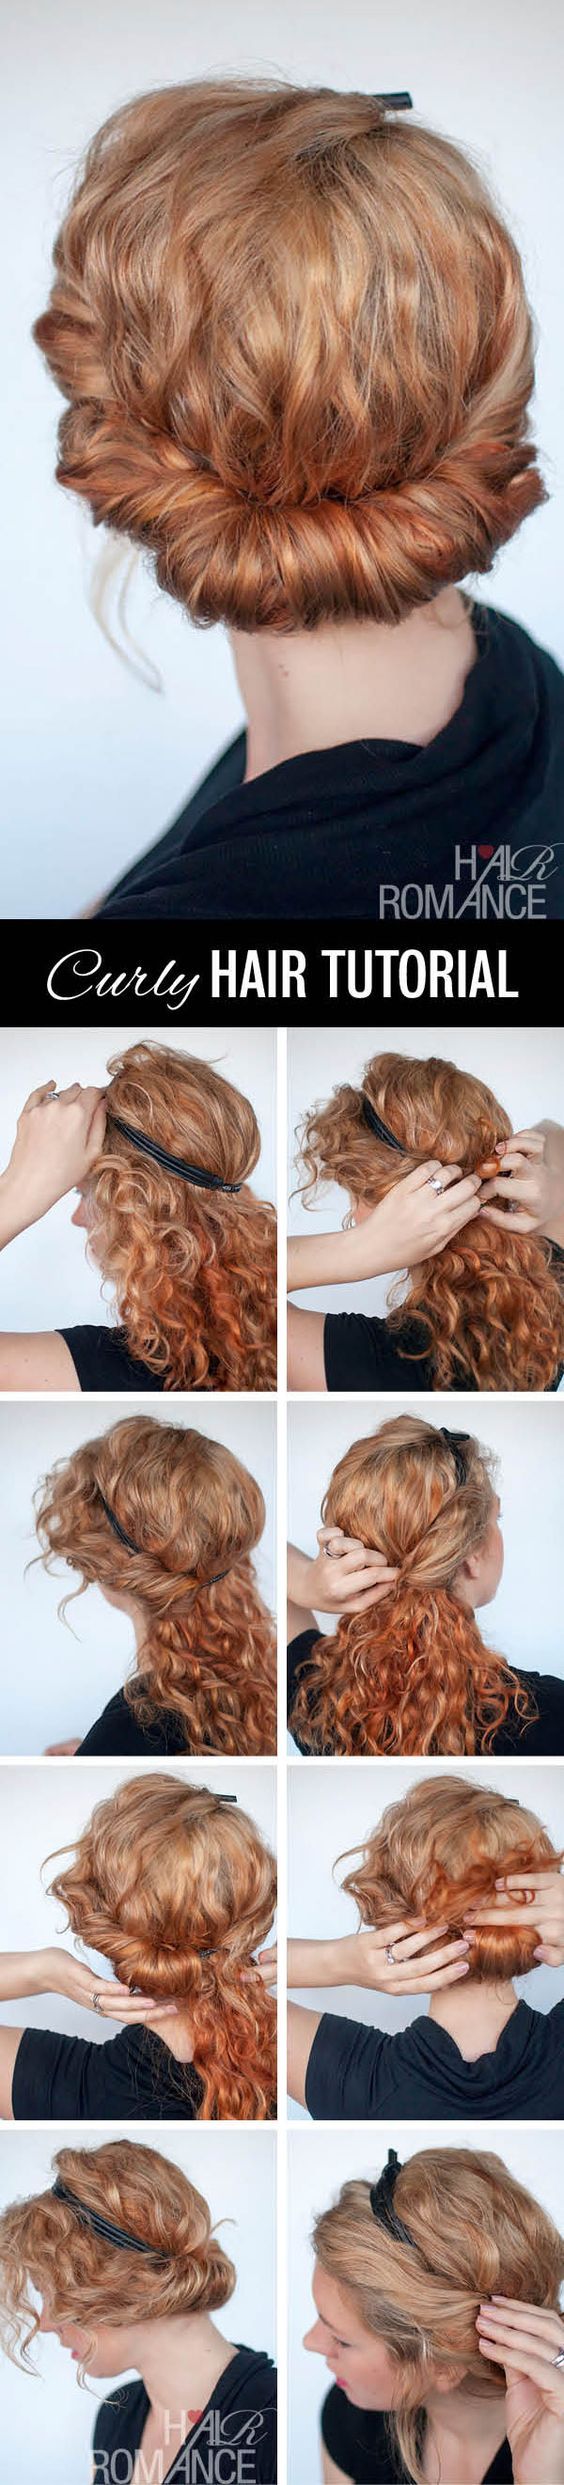 curly hairstyle tutorial – rolled headband upstyle